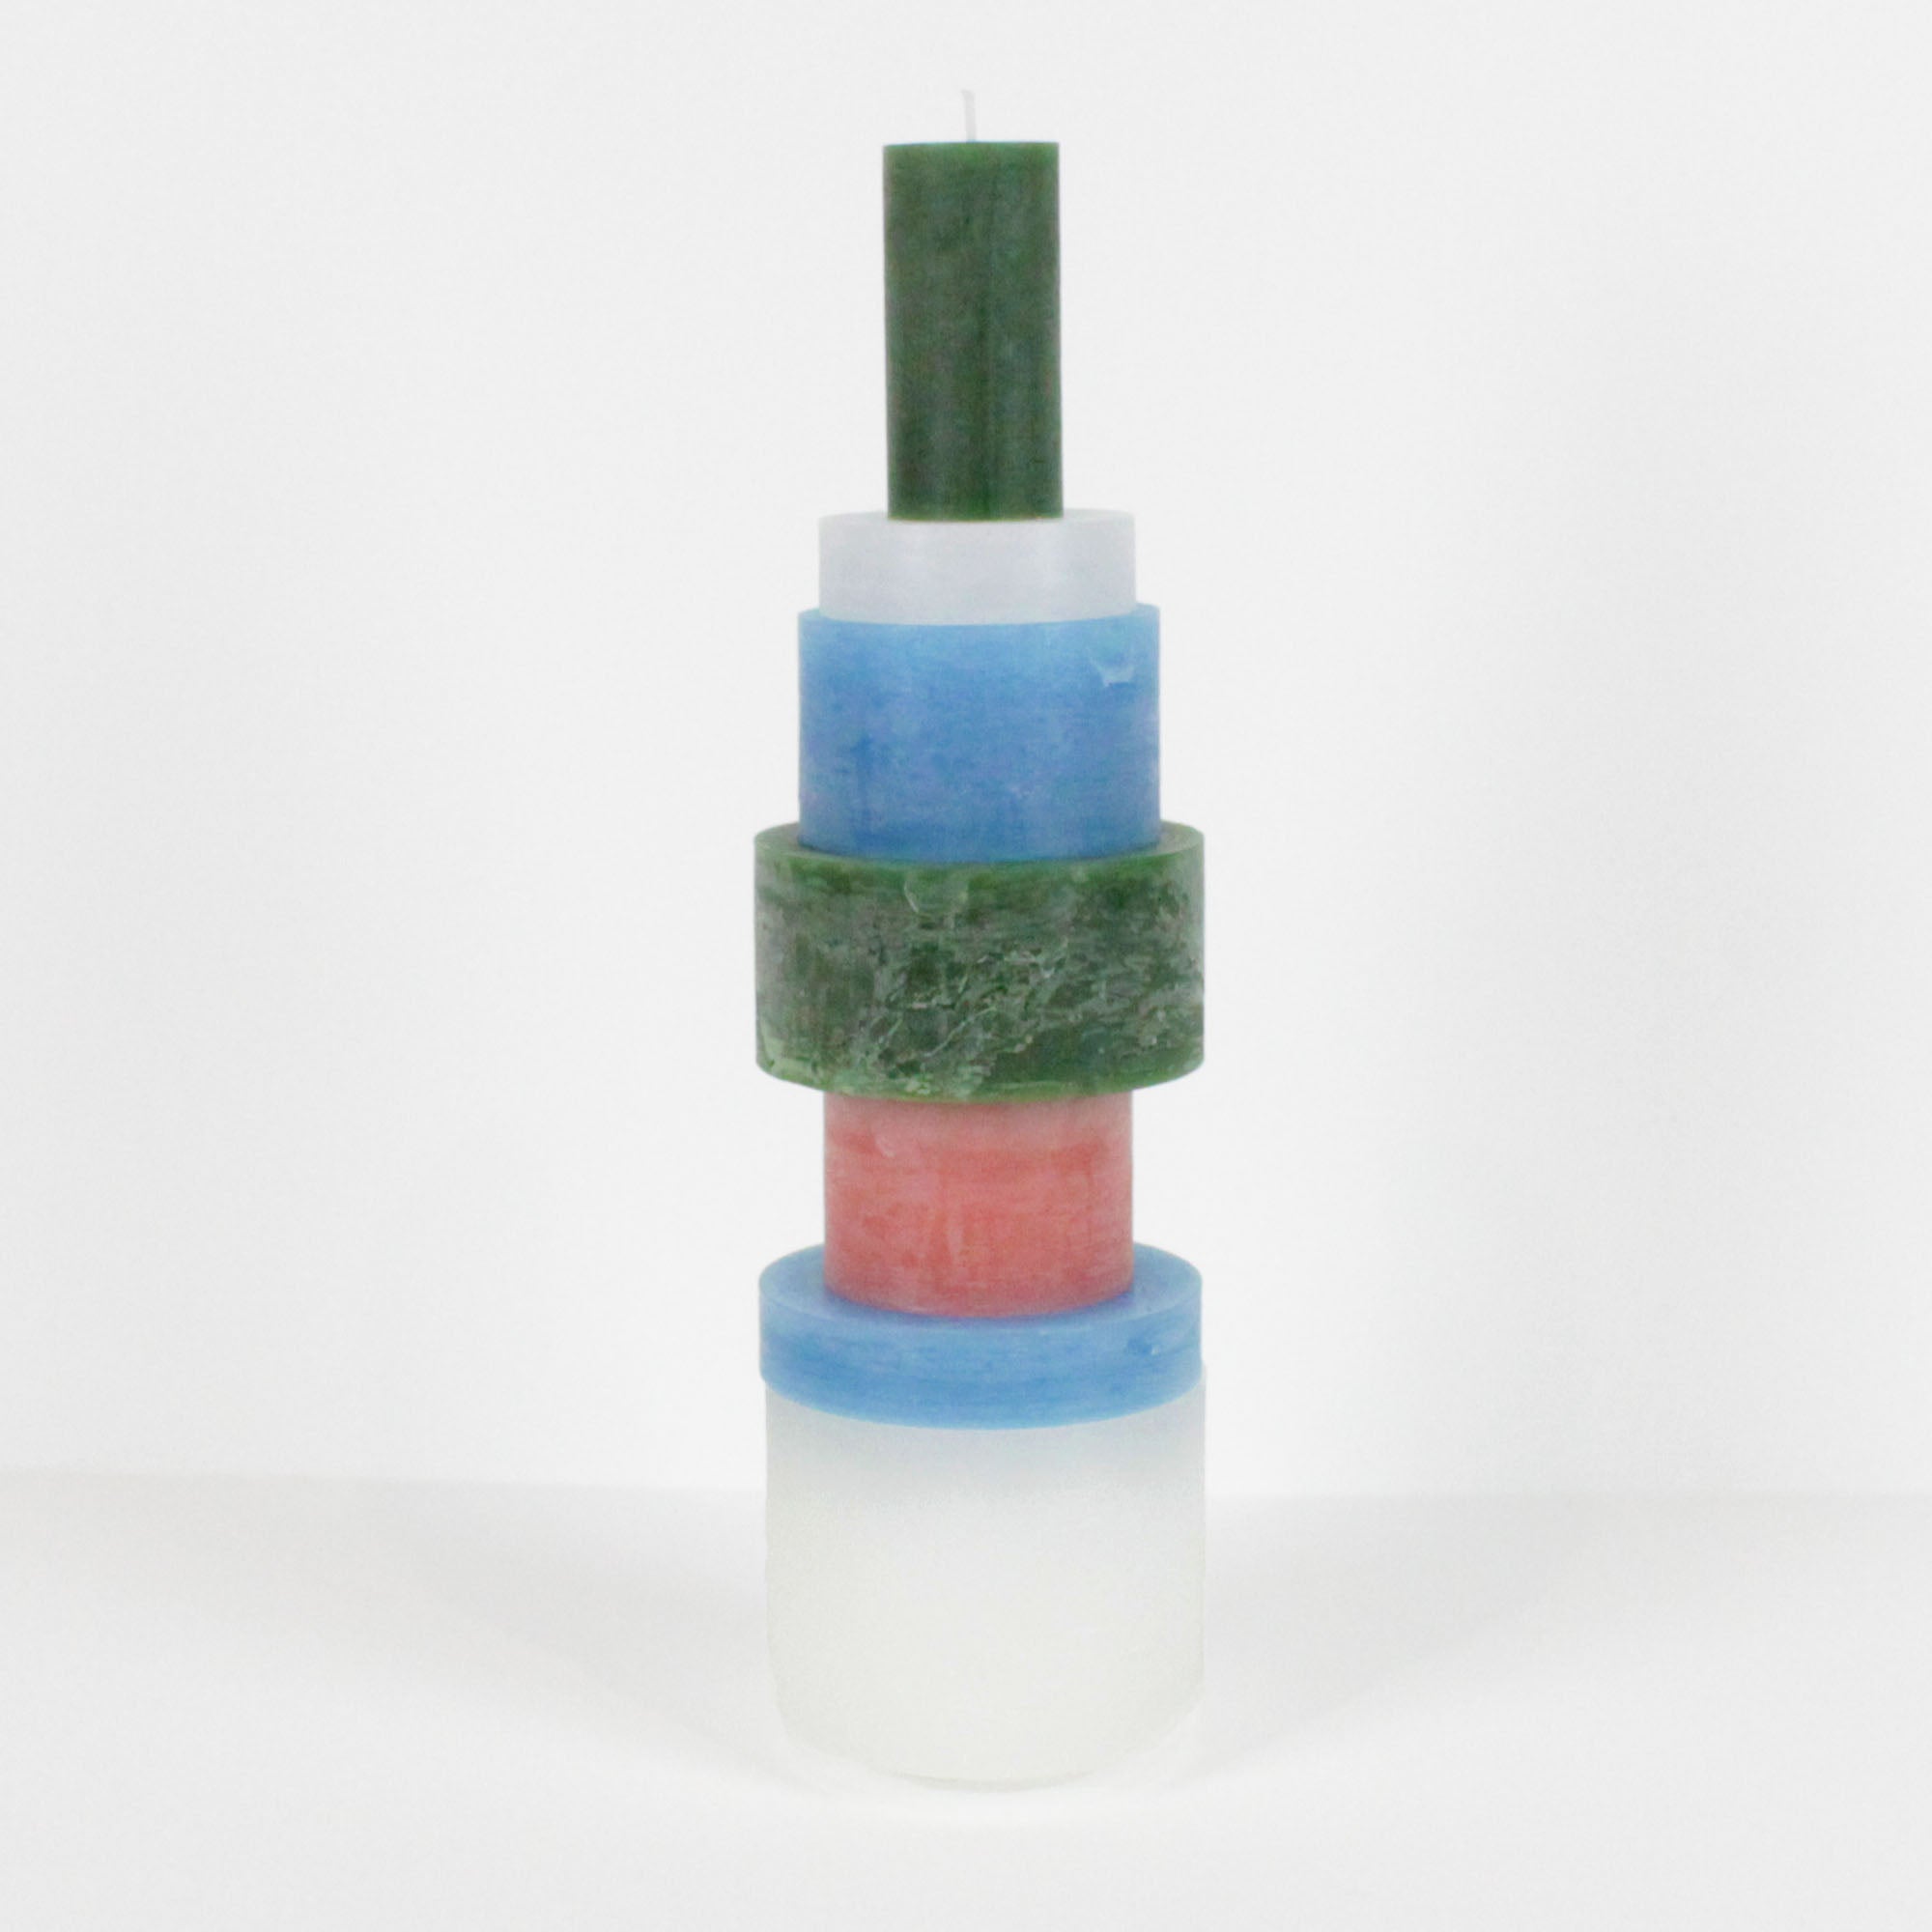 Candle Stack 07 (Green)